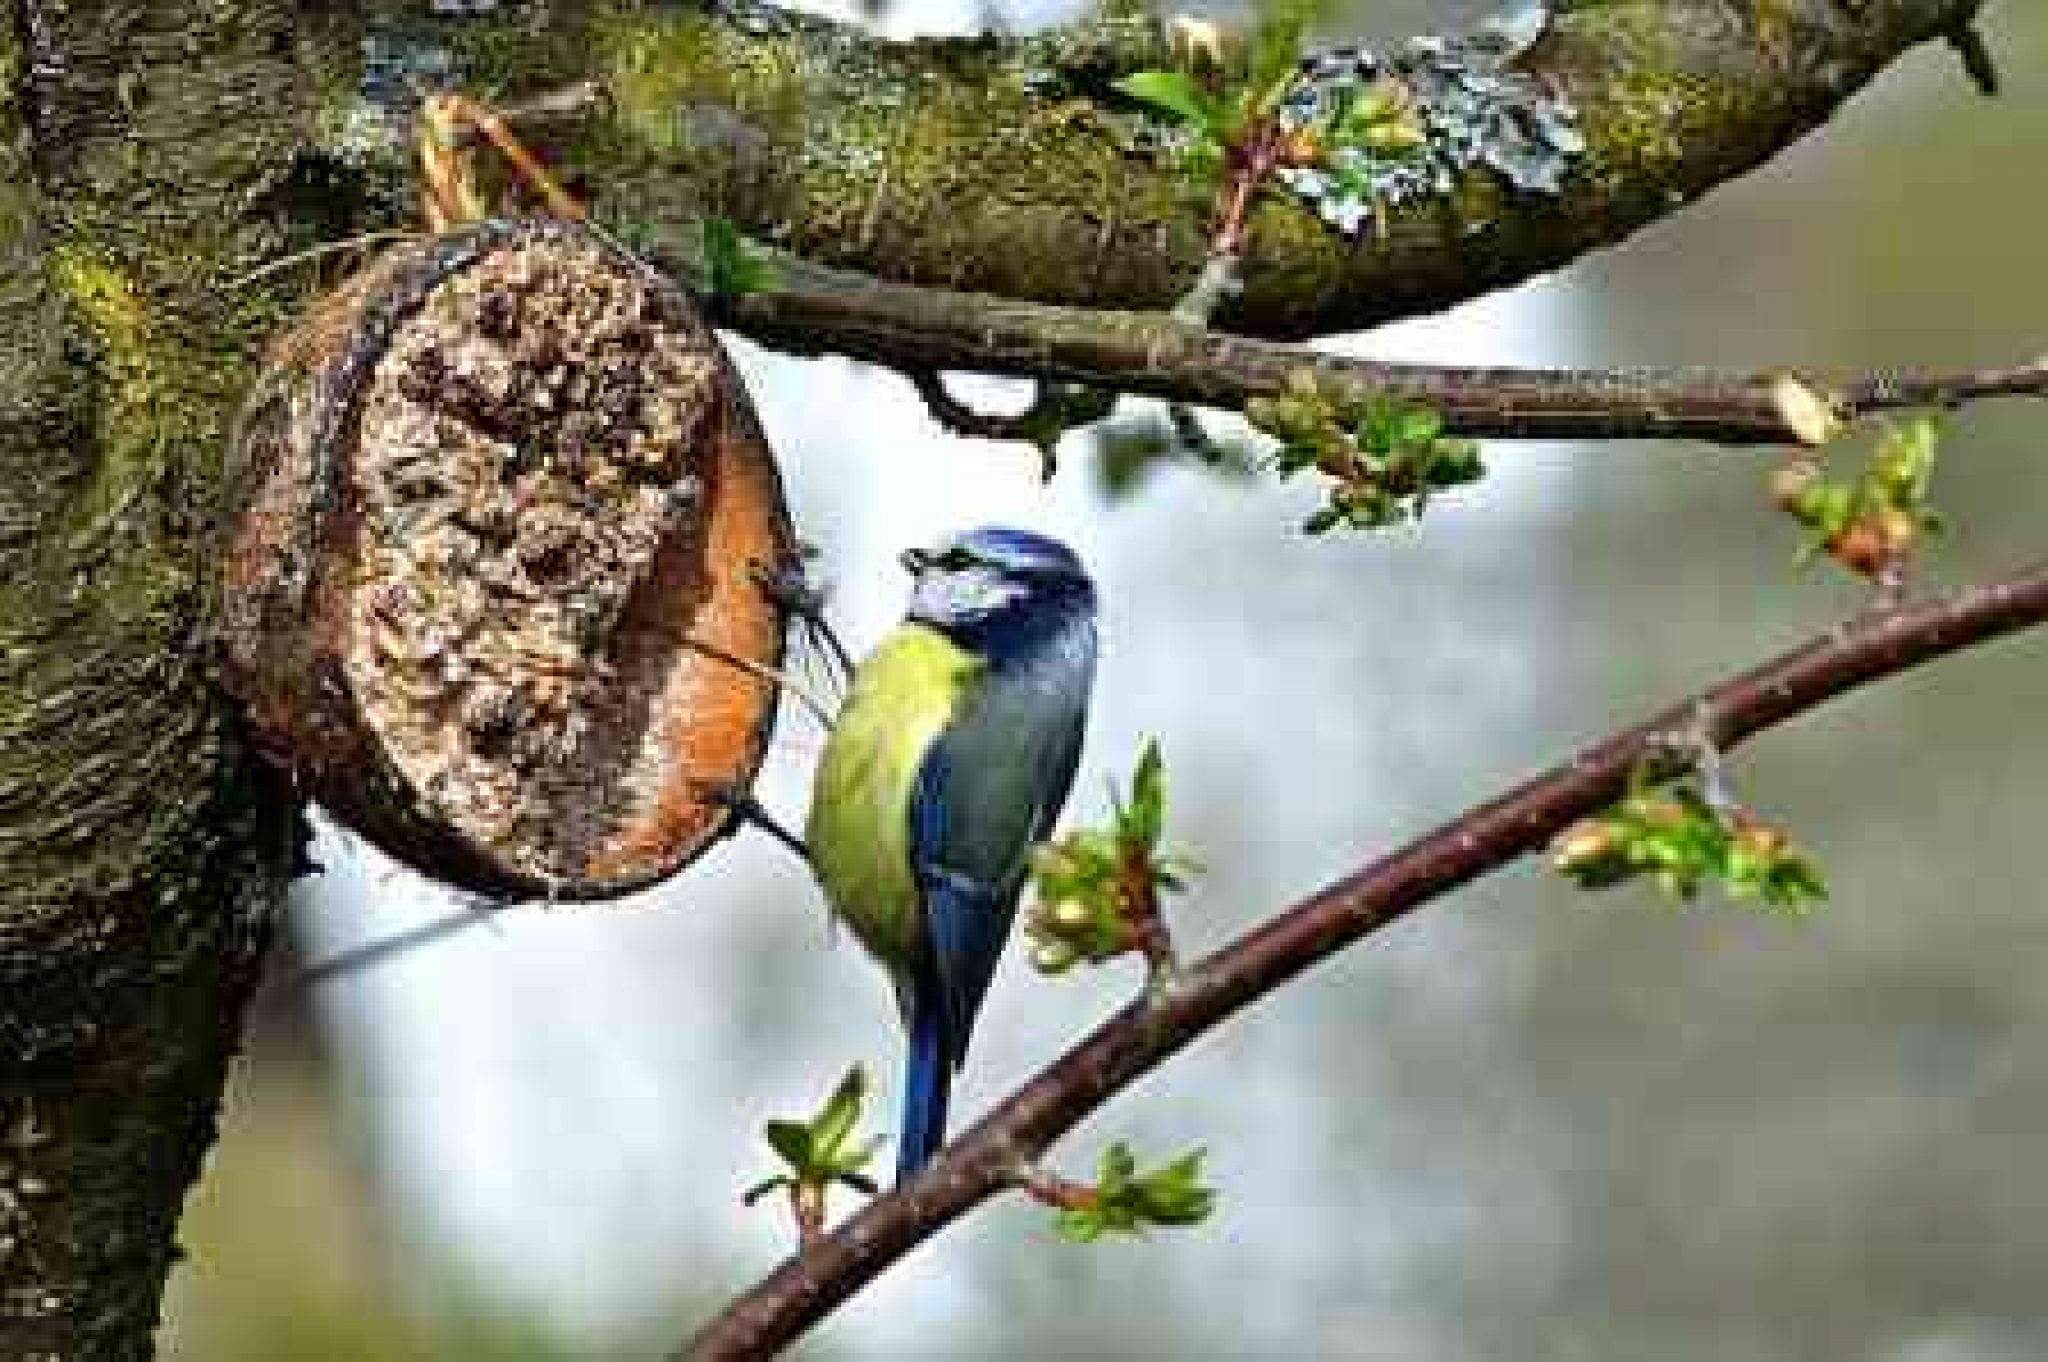 what human food can small birds eat